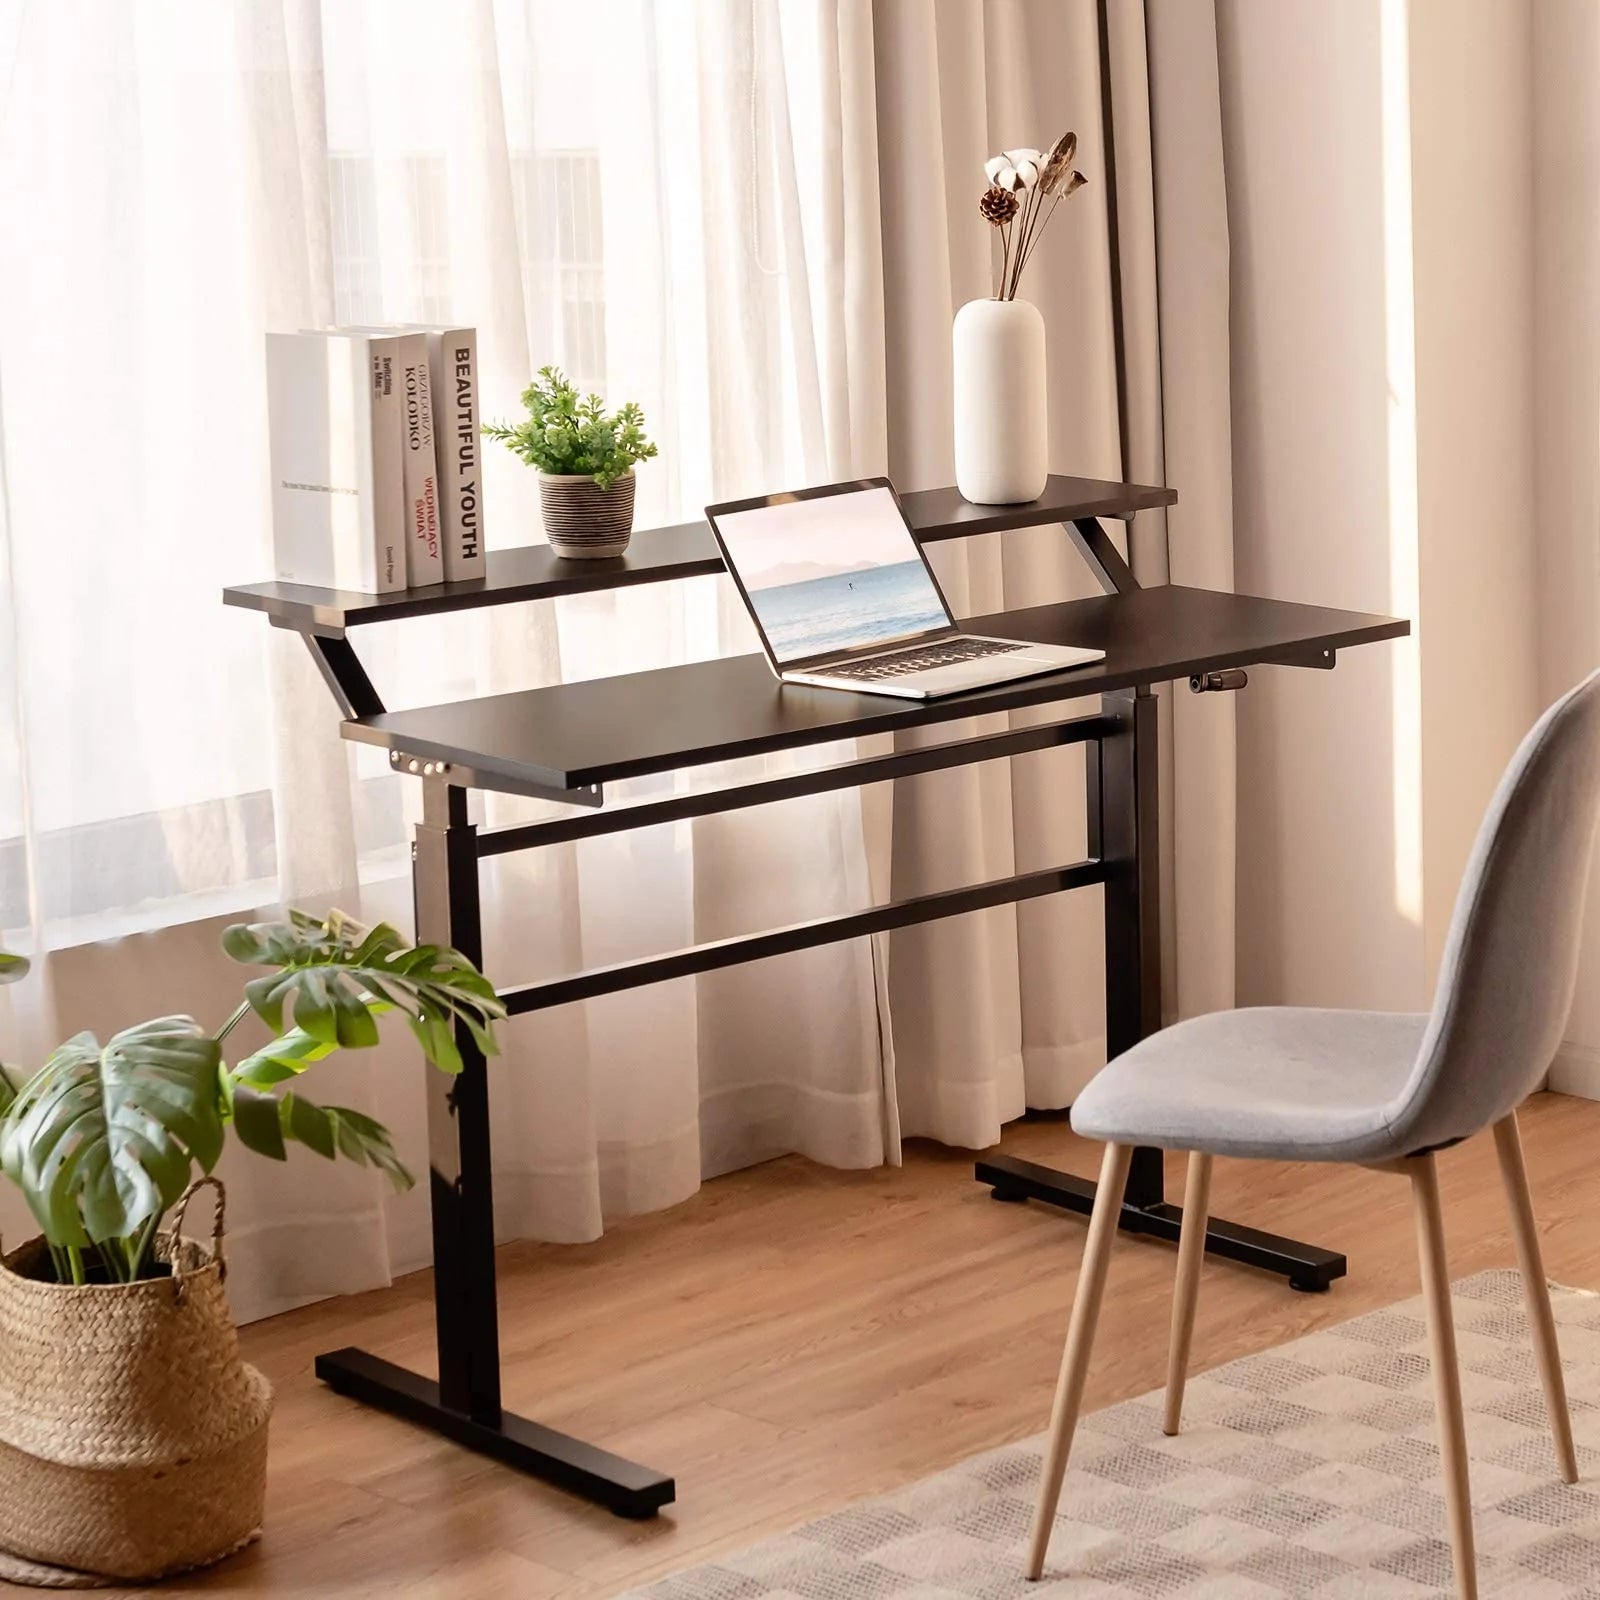 5 Options of Office Desks for You